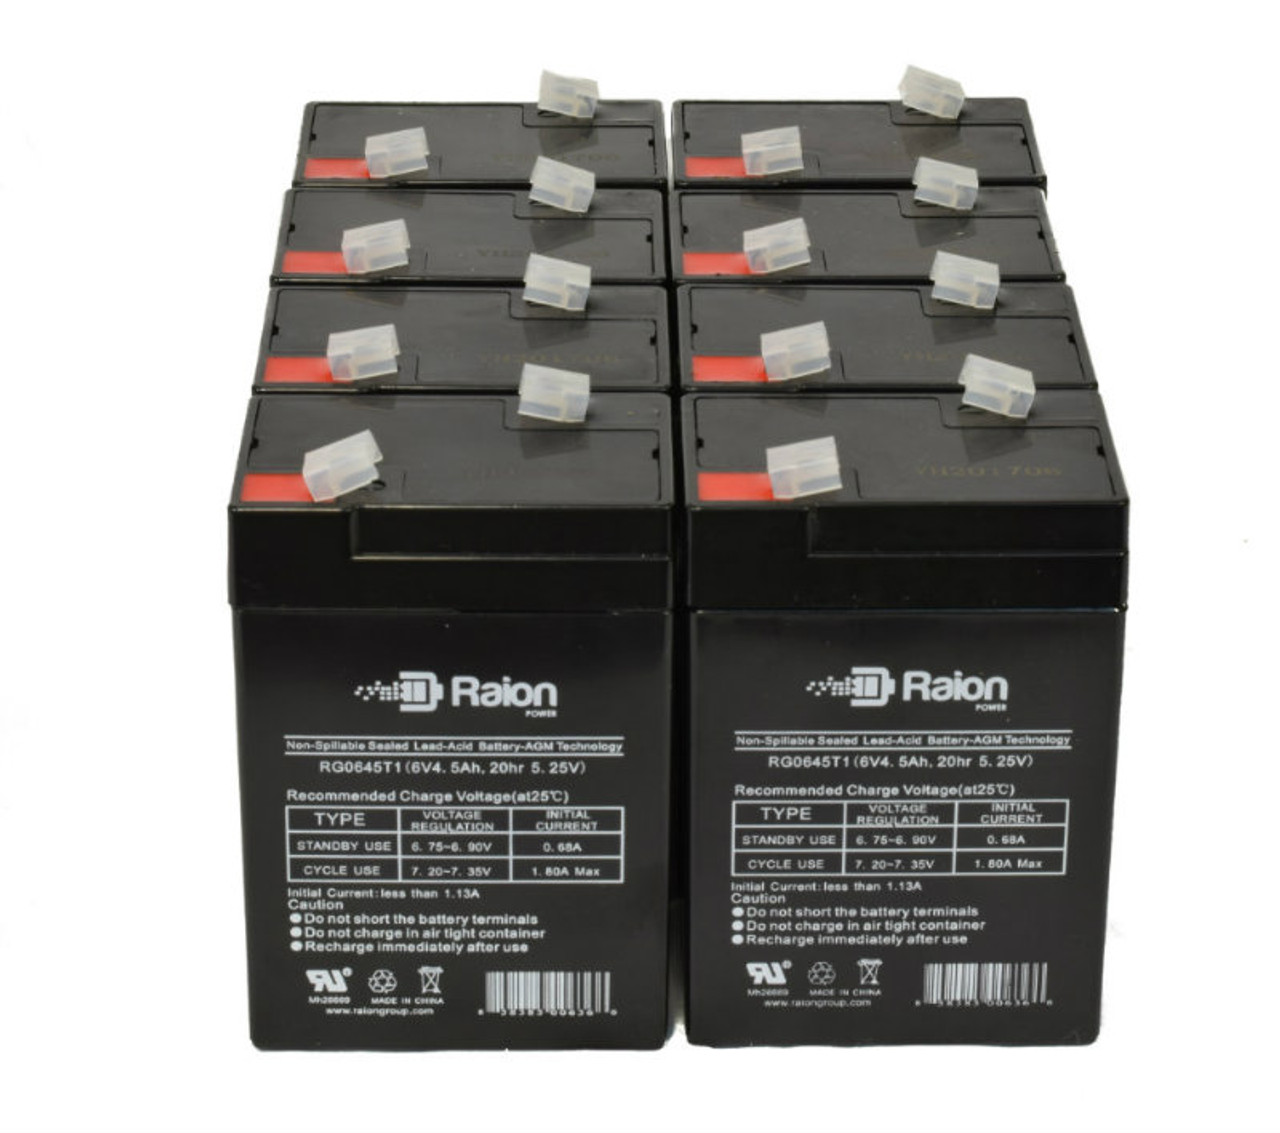 Raion Power 6 Volt 4.5Ah RG0645T1 Replacement Battery for Sheng Yang SY645 - 8 Pack